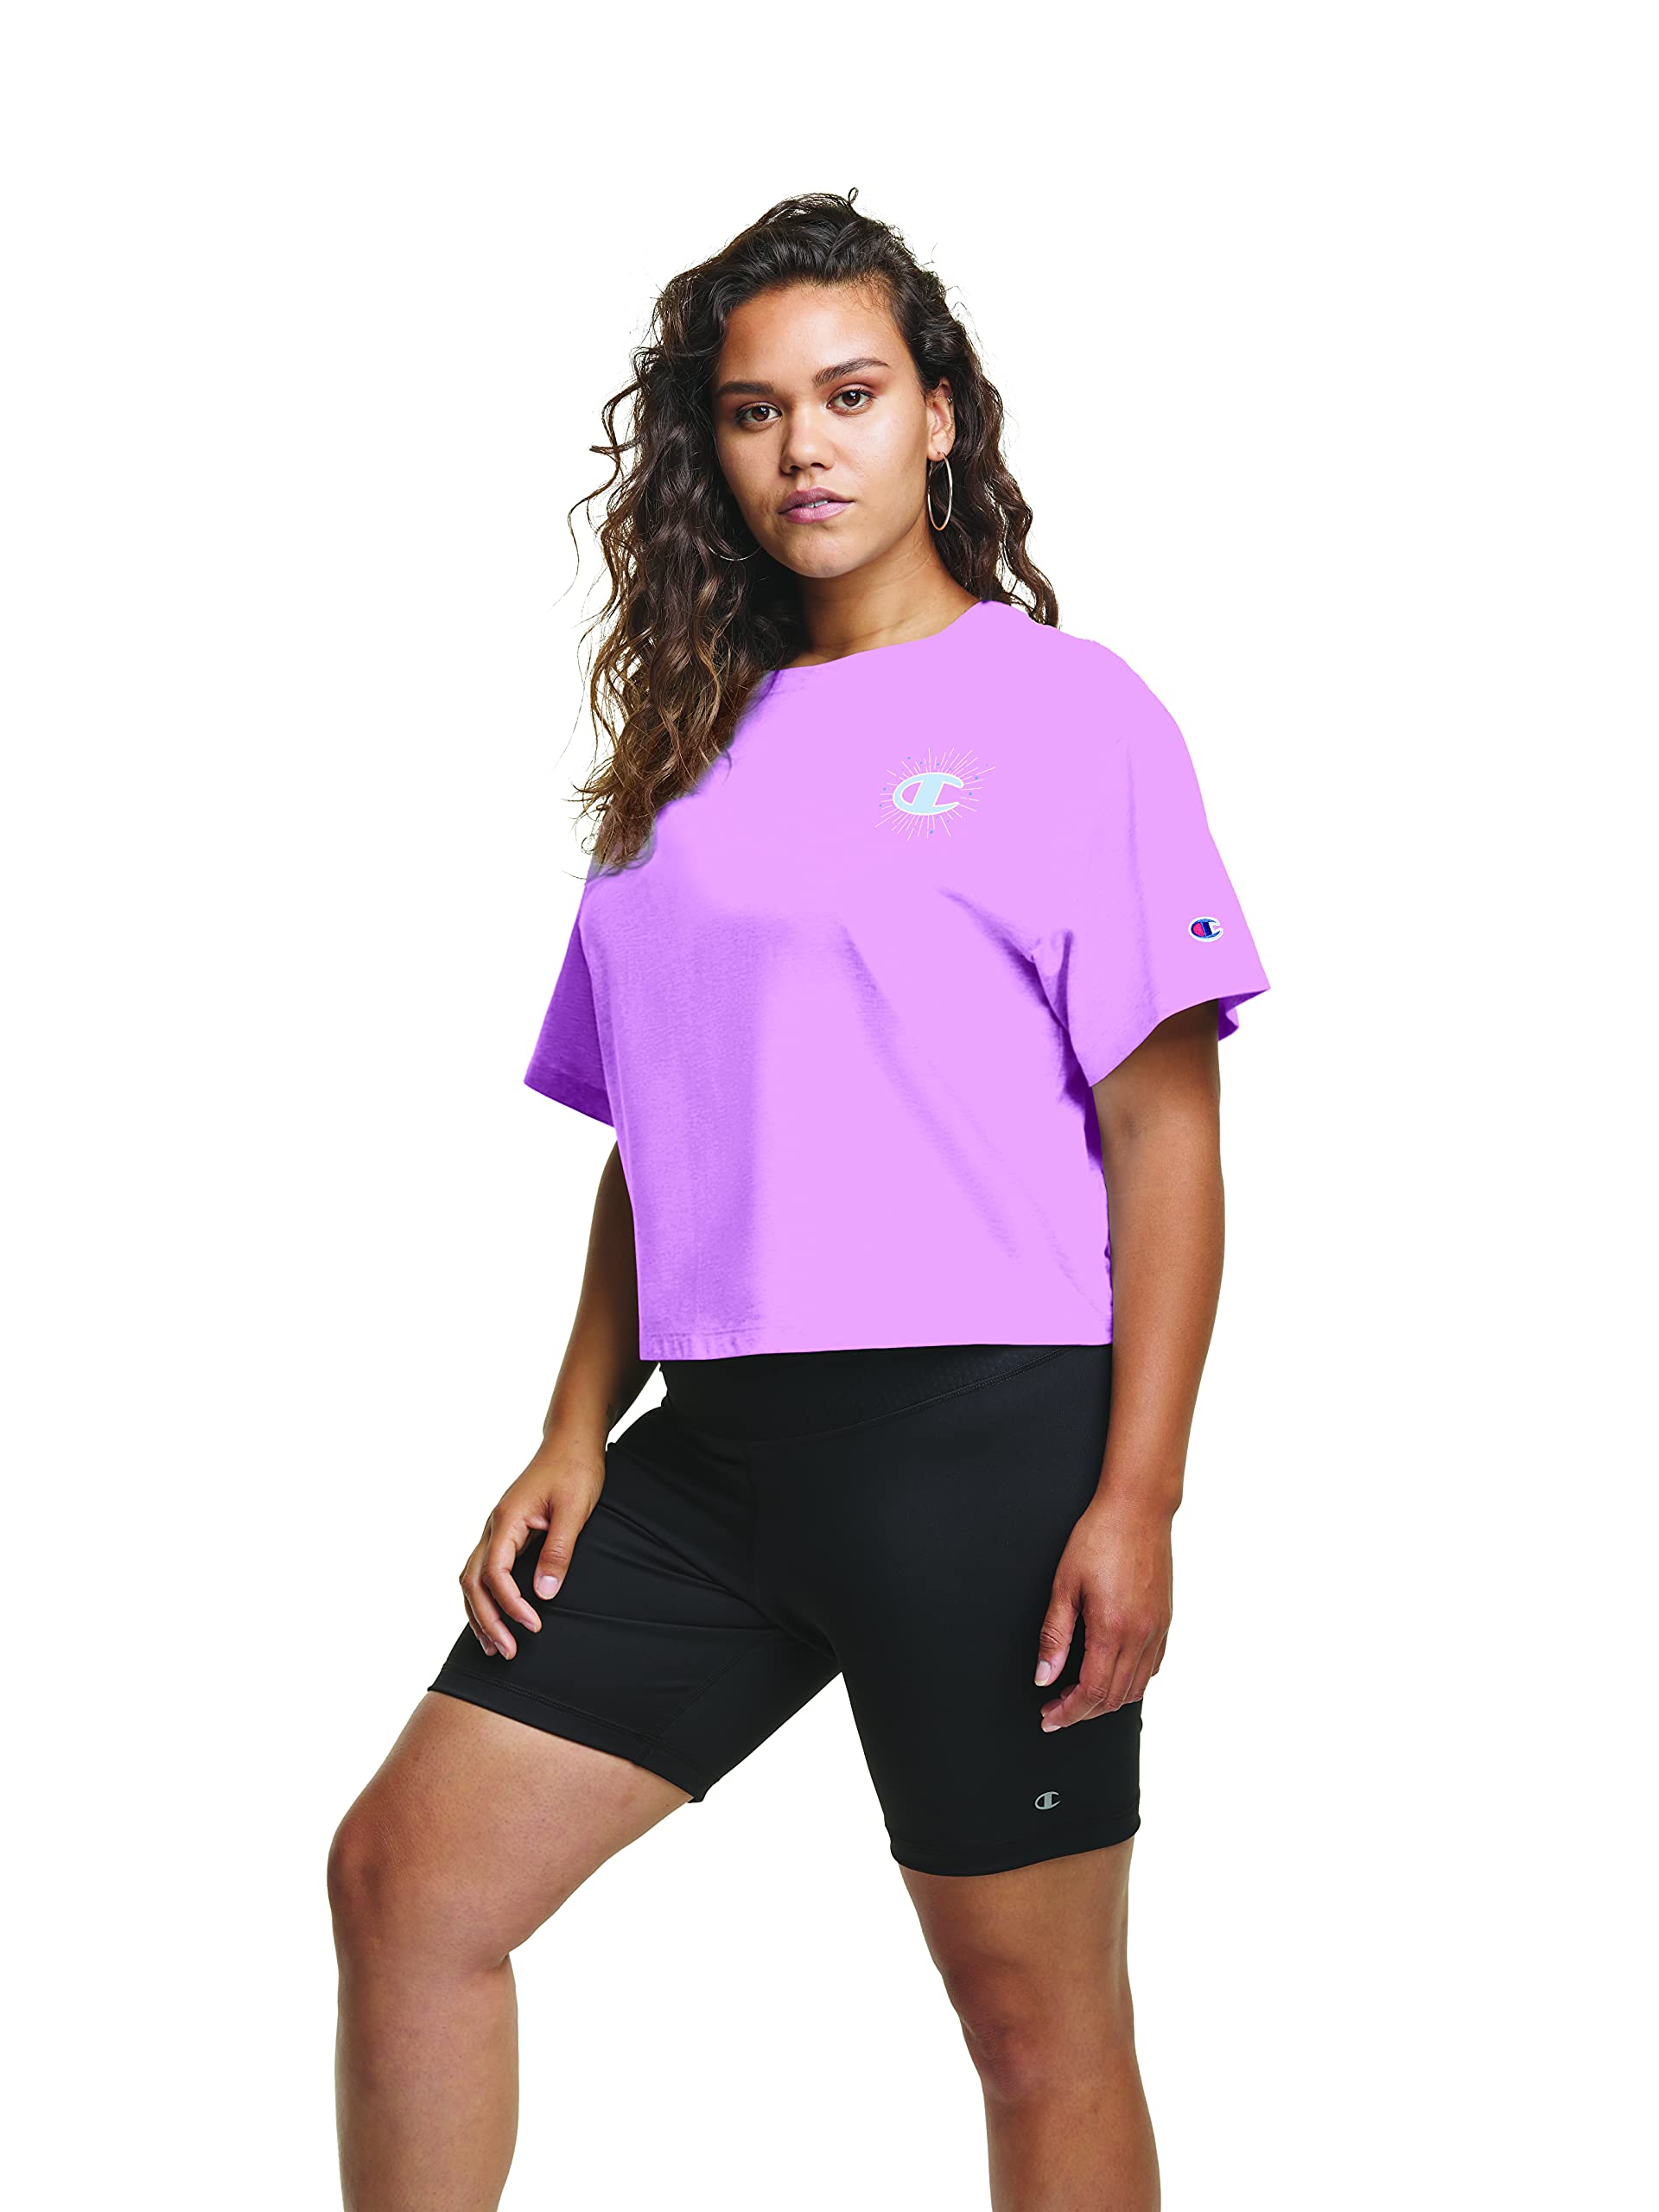 Champion Women's Size Plus Cropped Graphic Tee, Paper Orchid-586788, 2X